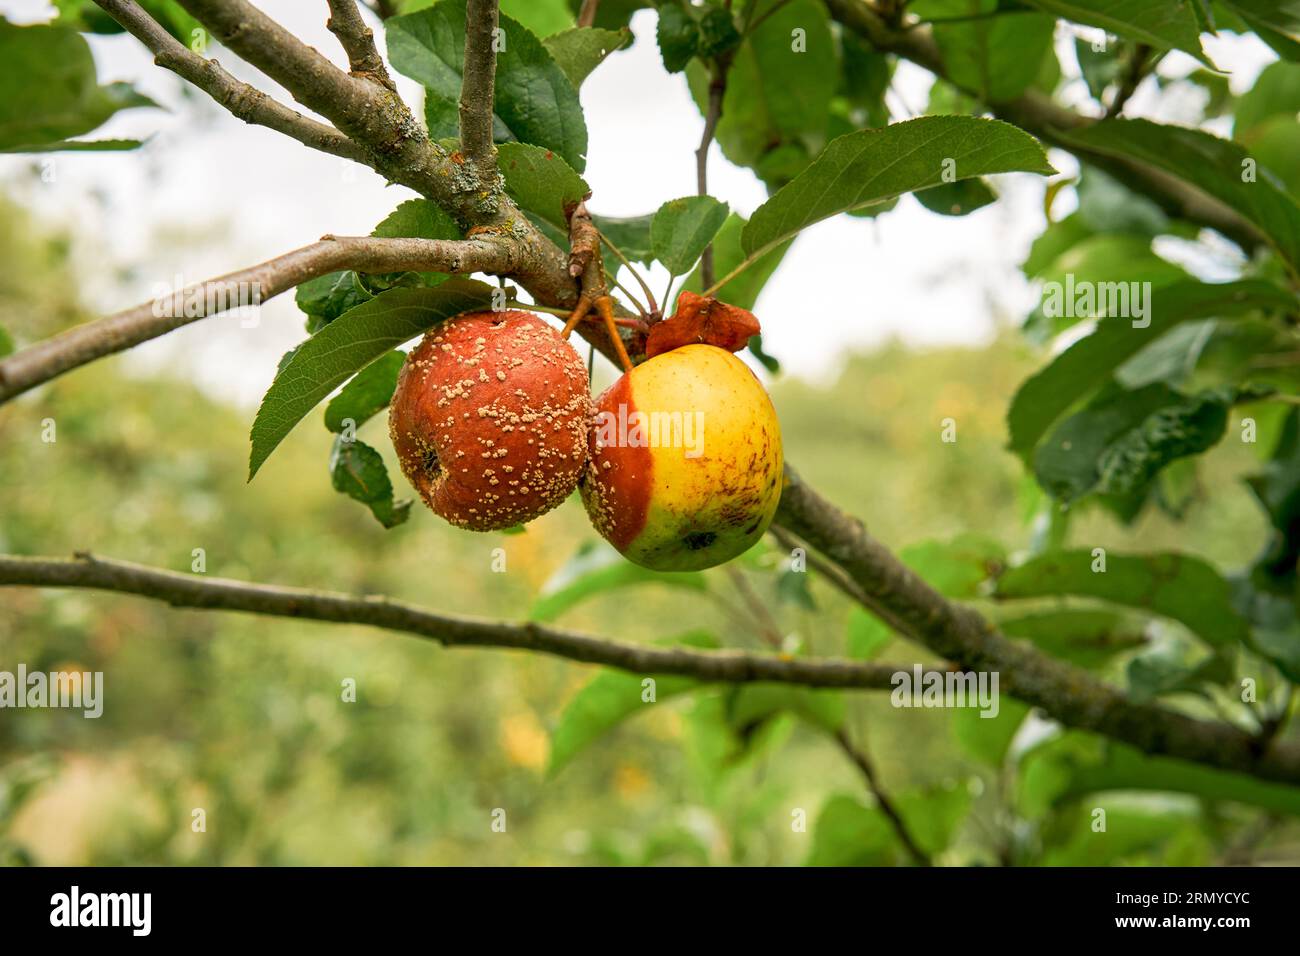 Brown rot Monilinia laxa fungal infection of apples Stock Photo